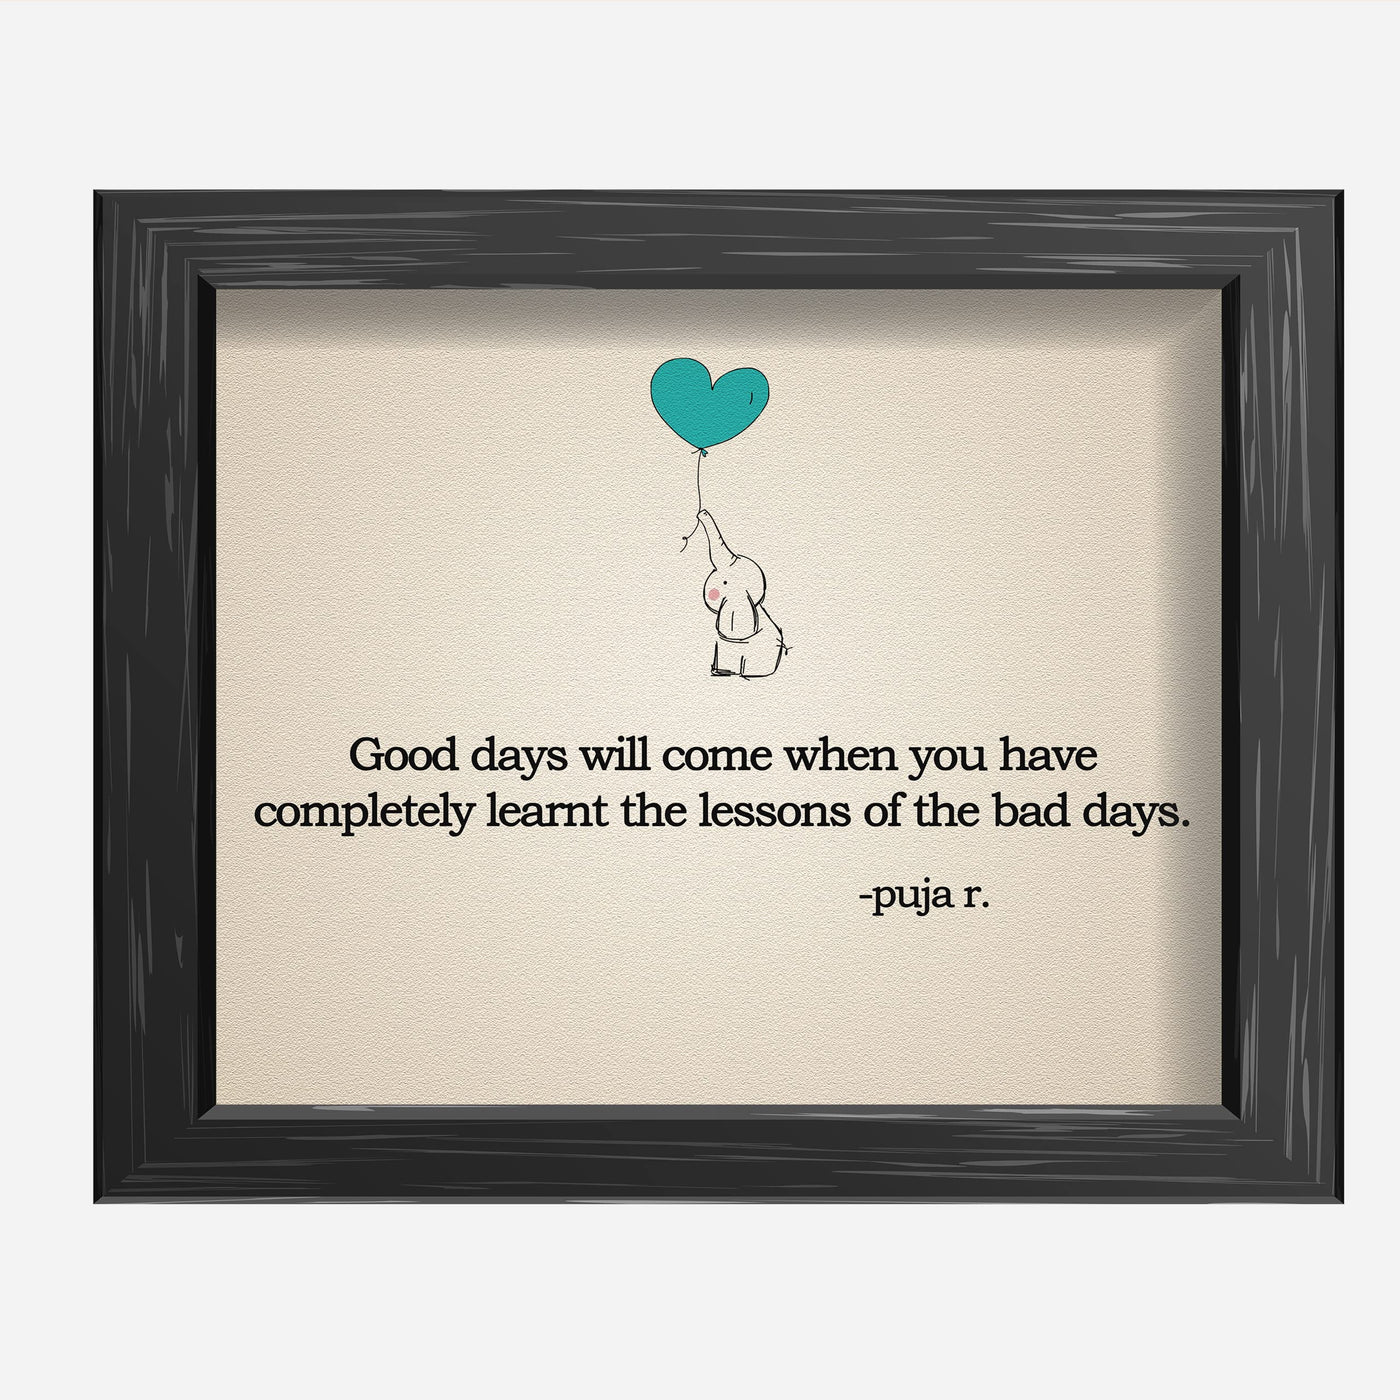 Good Days Will Come- Inspirational Quotes Wall Art -10 x 8" Modern Print w/Elephant & Heart Balloon Picture -Ready to Frame. Motivational Home-Office-School Decor. Great Life Lesson & Gift!